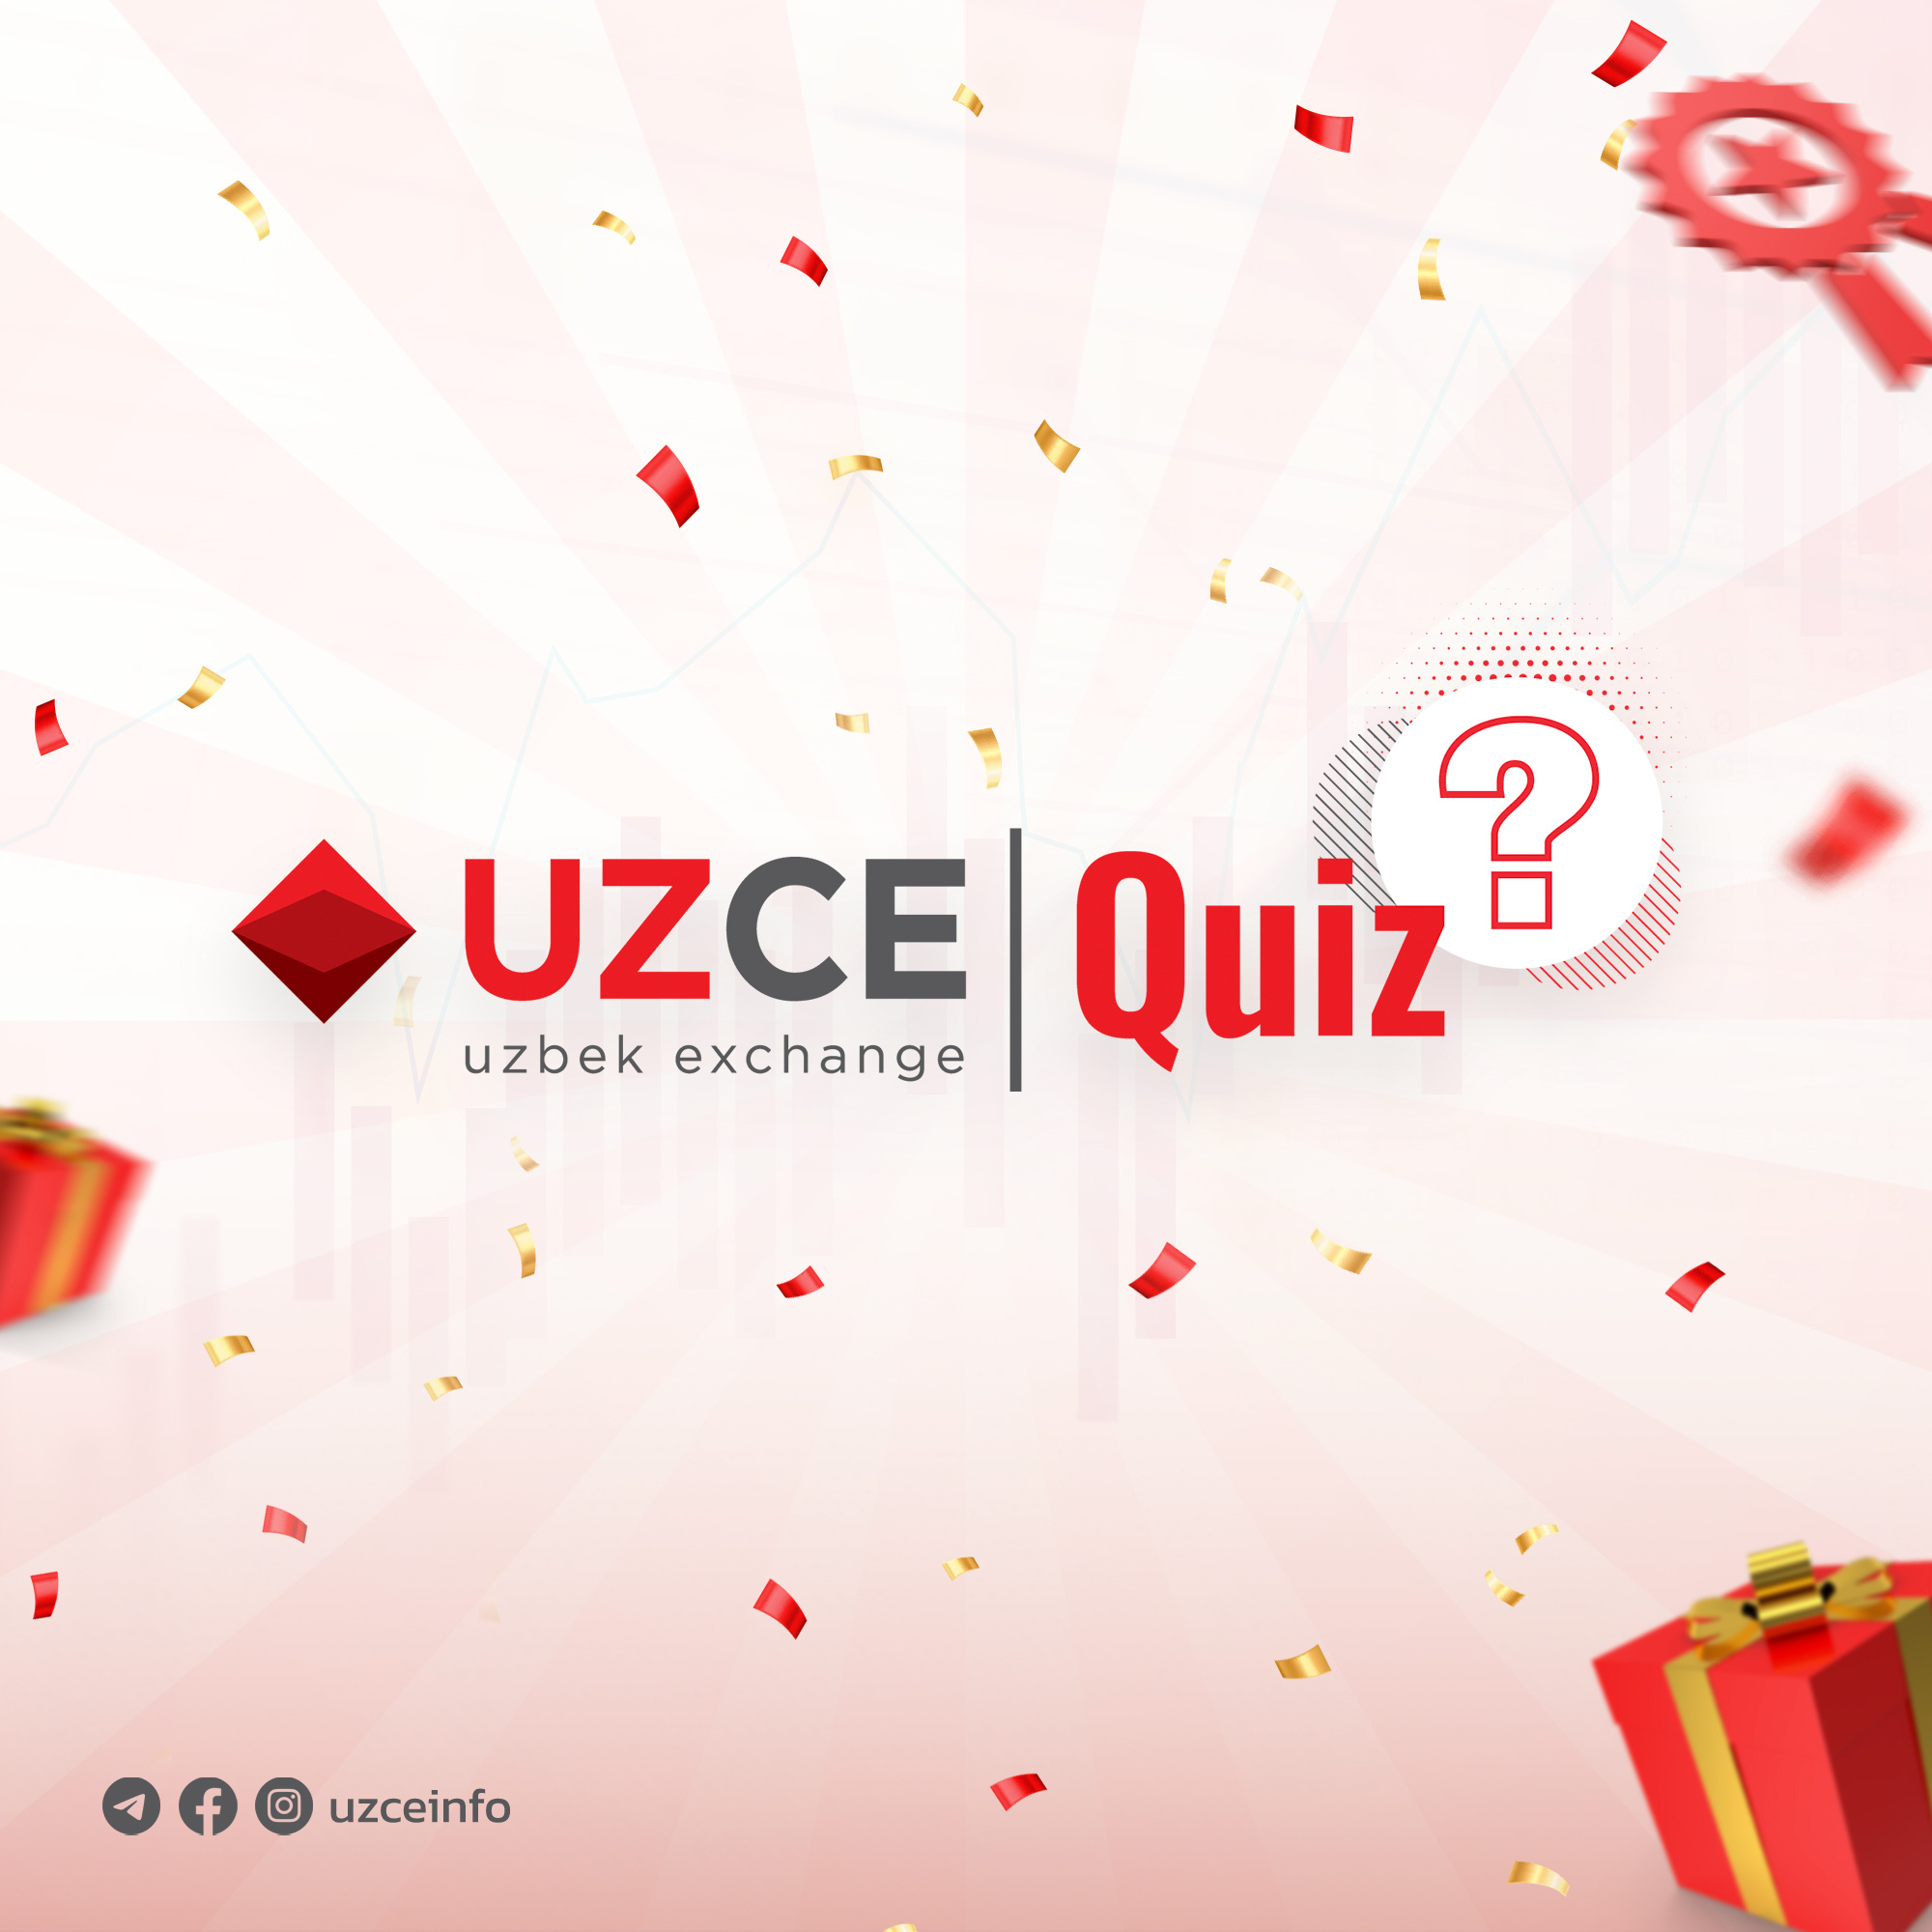 The final results of the UZCE Quiz have been summed up